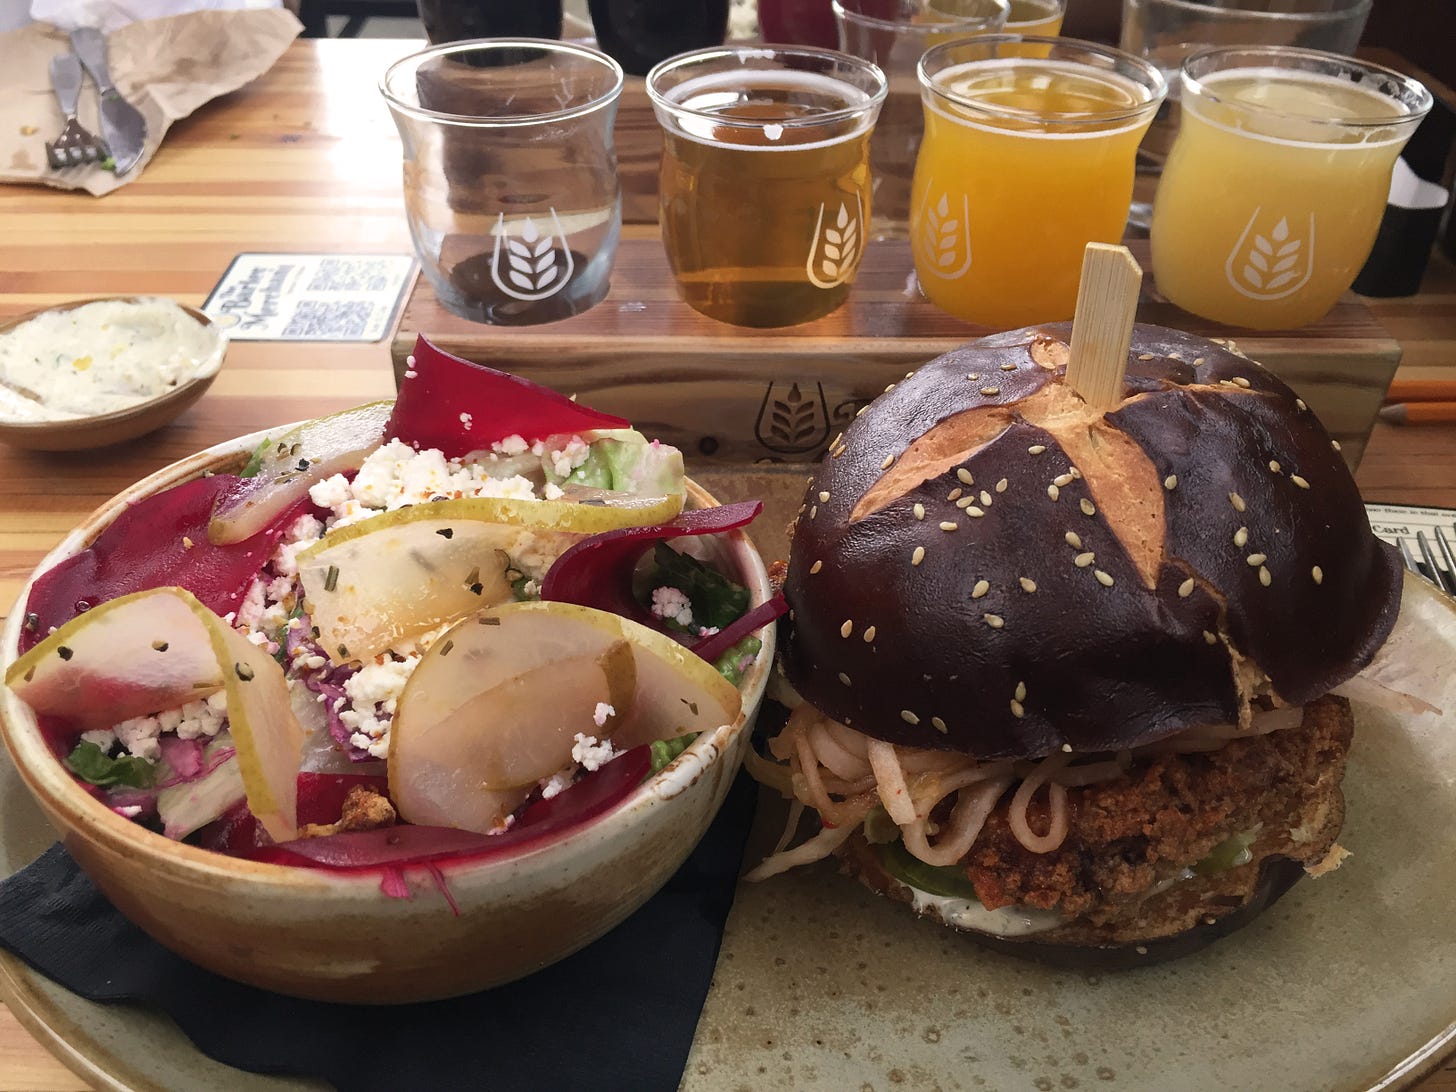 On a wide stone plate, a small bowl of salad with slices of beet and pear and crumbles of goat cheese, beside a fried chicken sandwich with kimchi and pickles on a pretzel bun. Behind the plate is a flight of four beers, one of which is already empty.